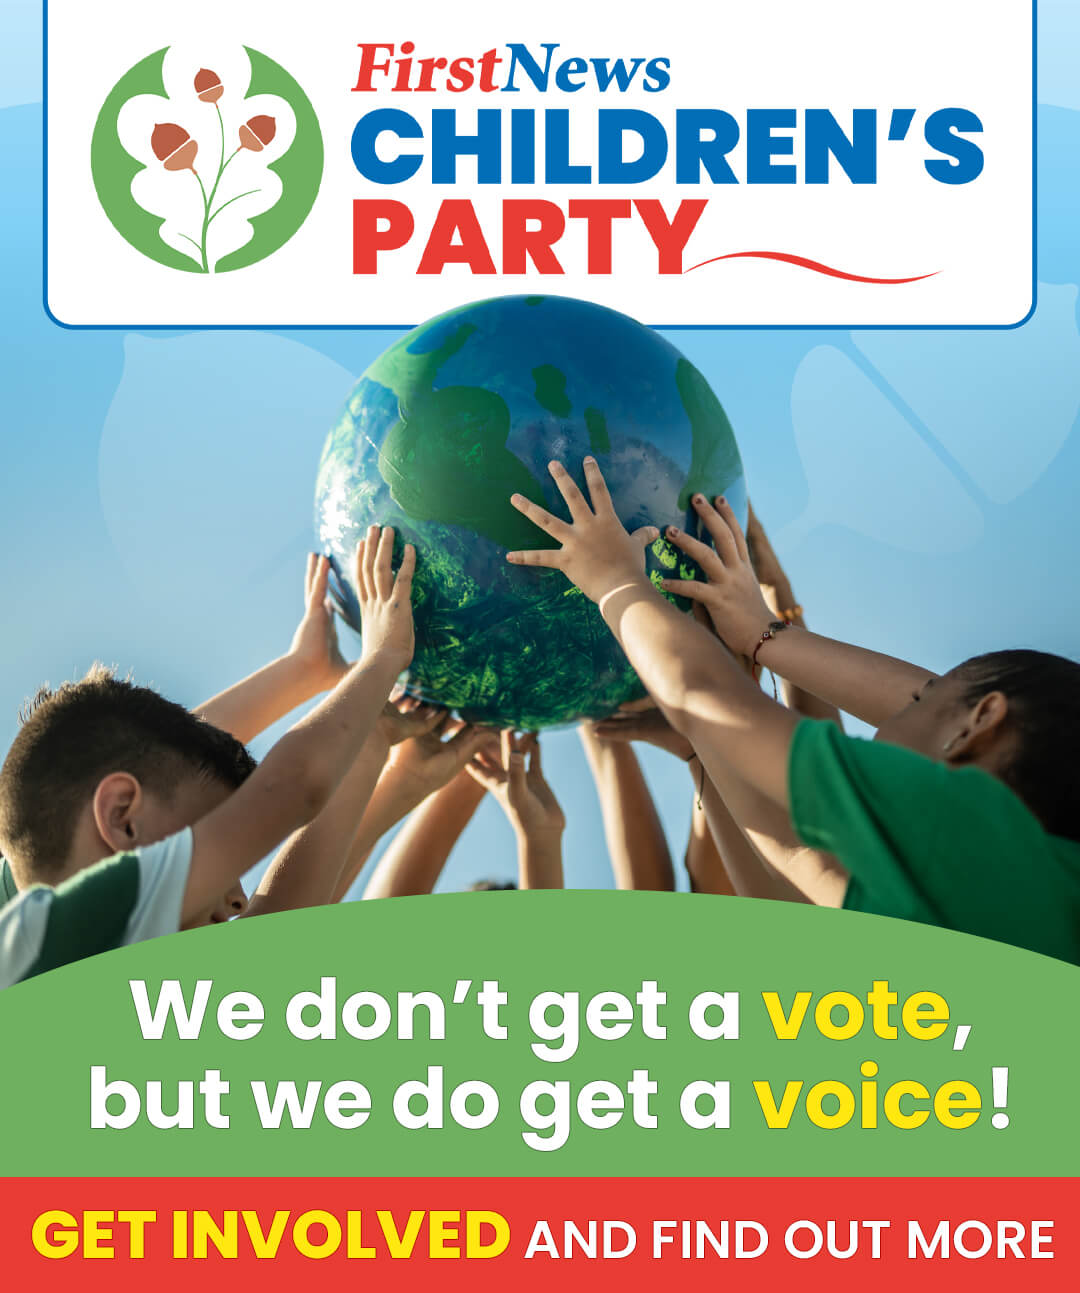 First News Children's Party - Get involved and find out more